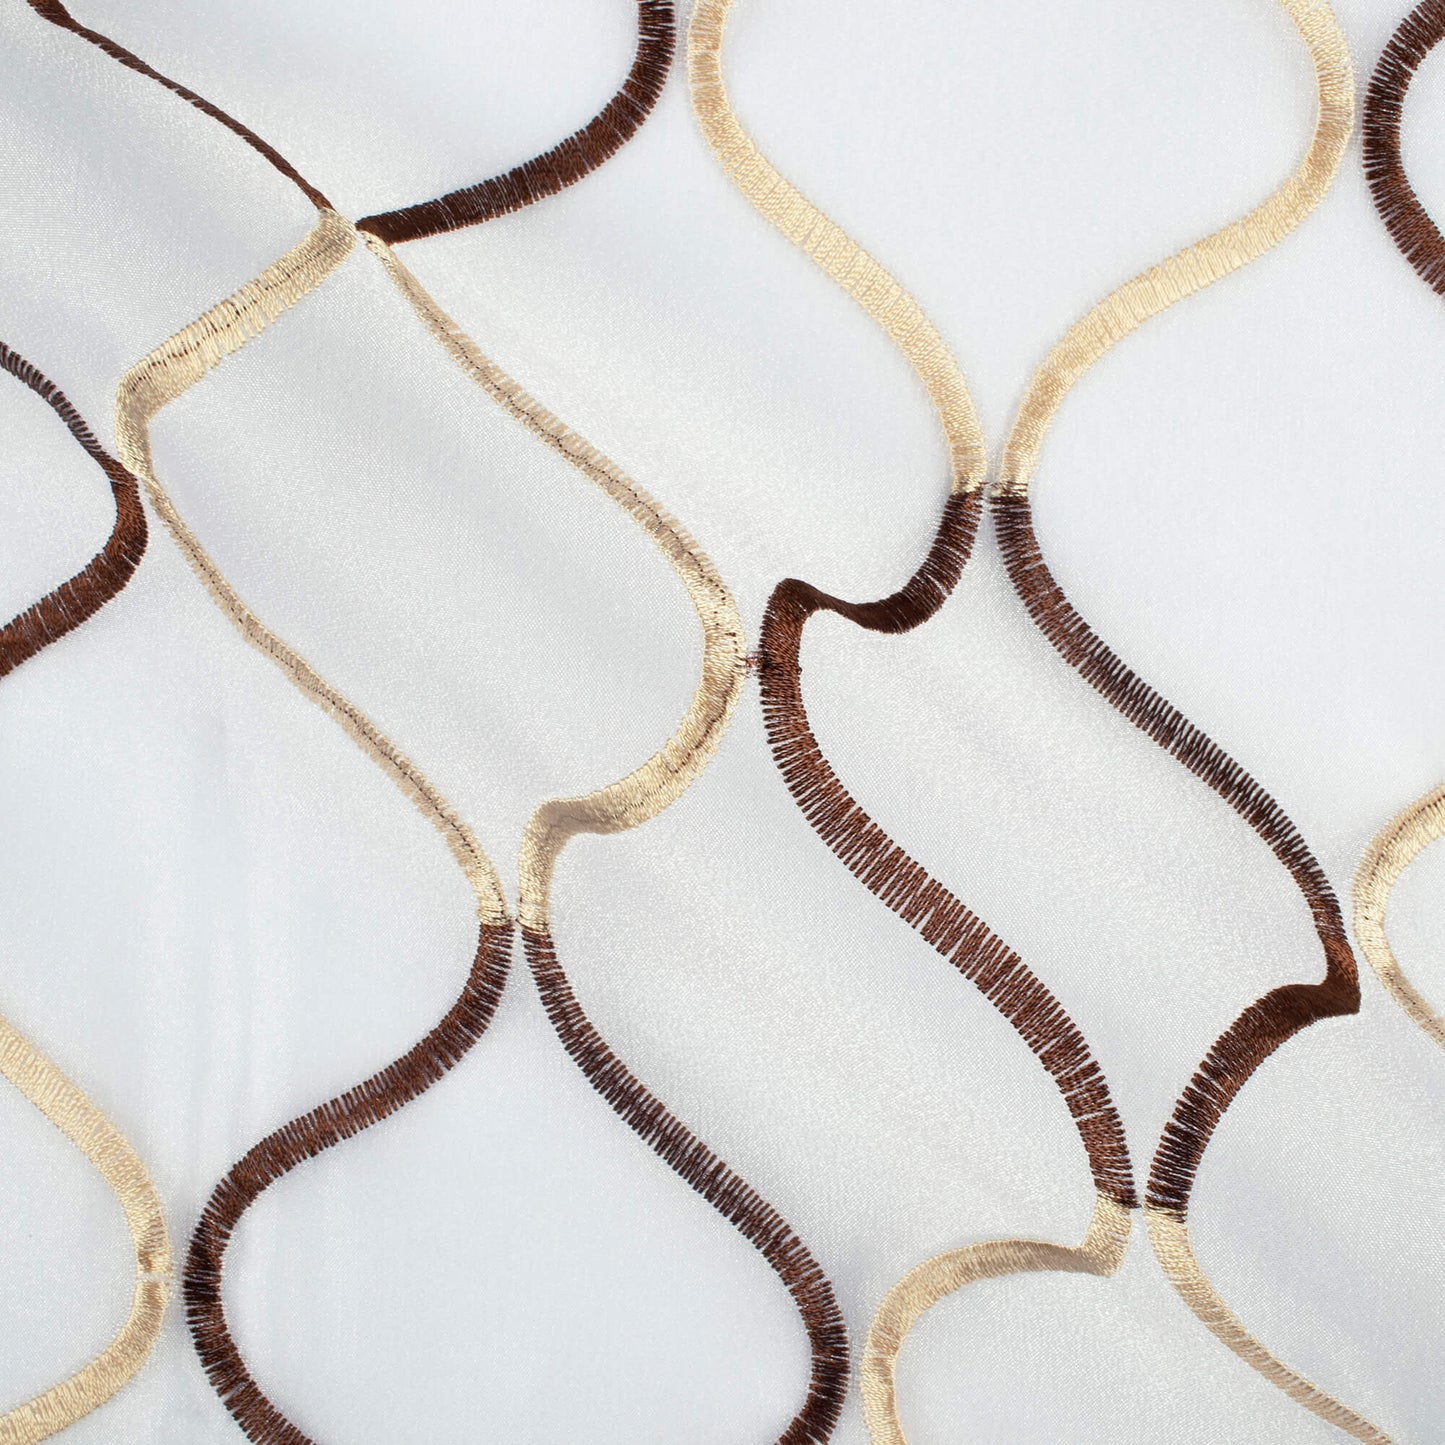 White And Coffee Brown Trellis Pattern Embroidery Organza Tissue Premium Sheer Fabric (Width 48 Inches)